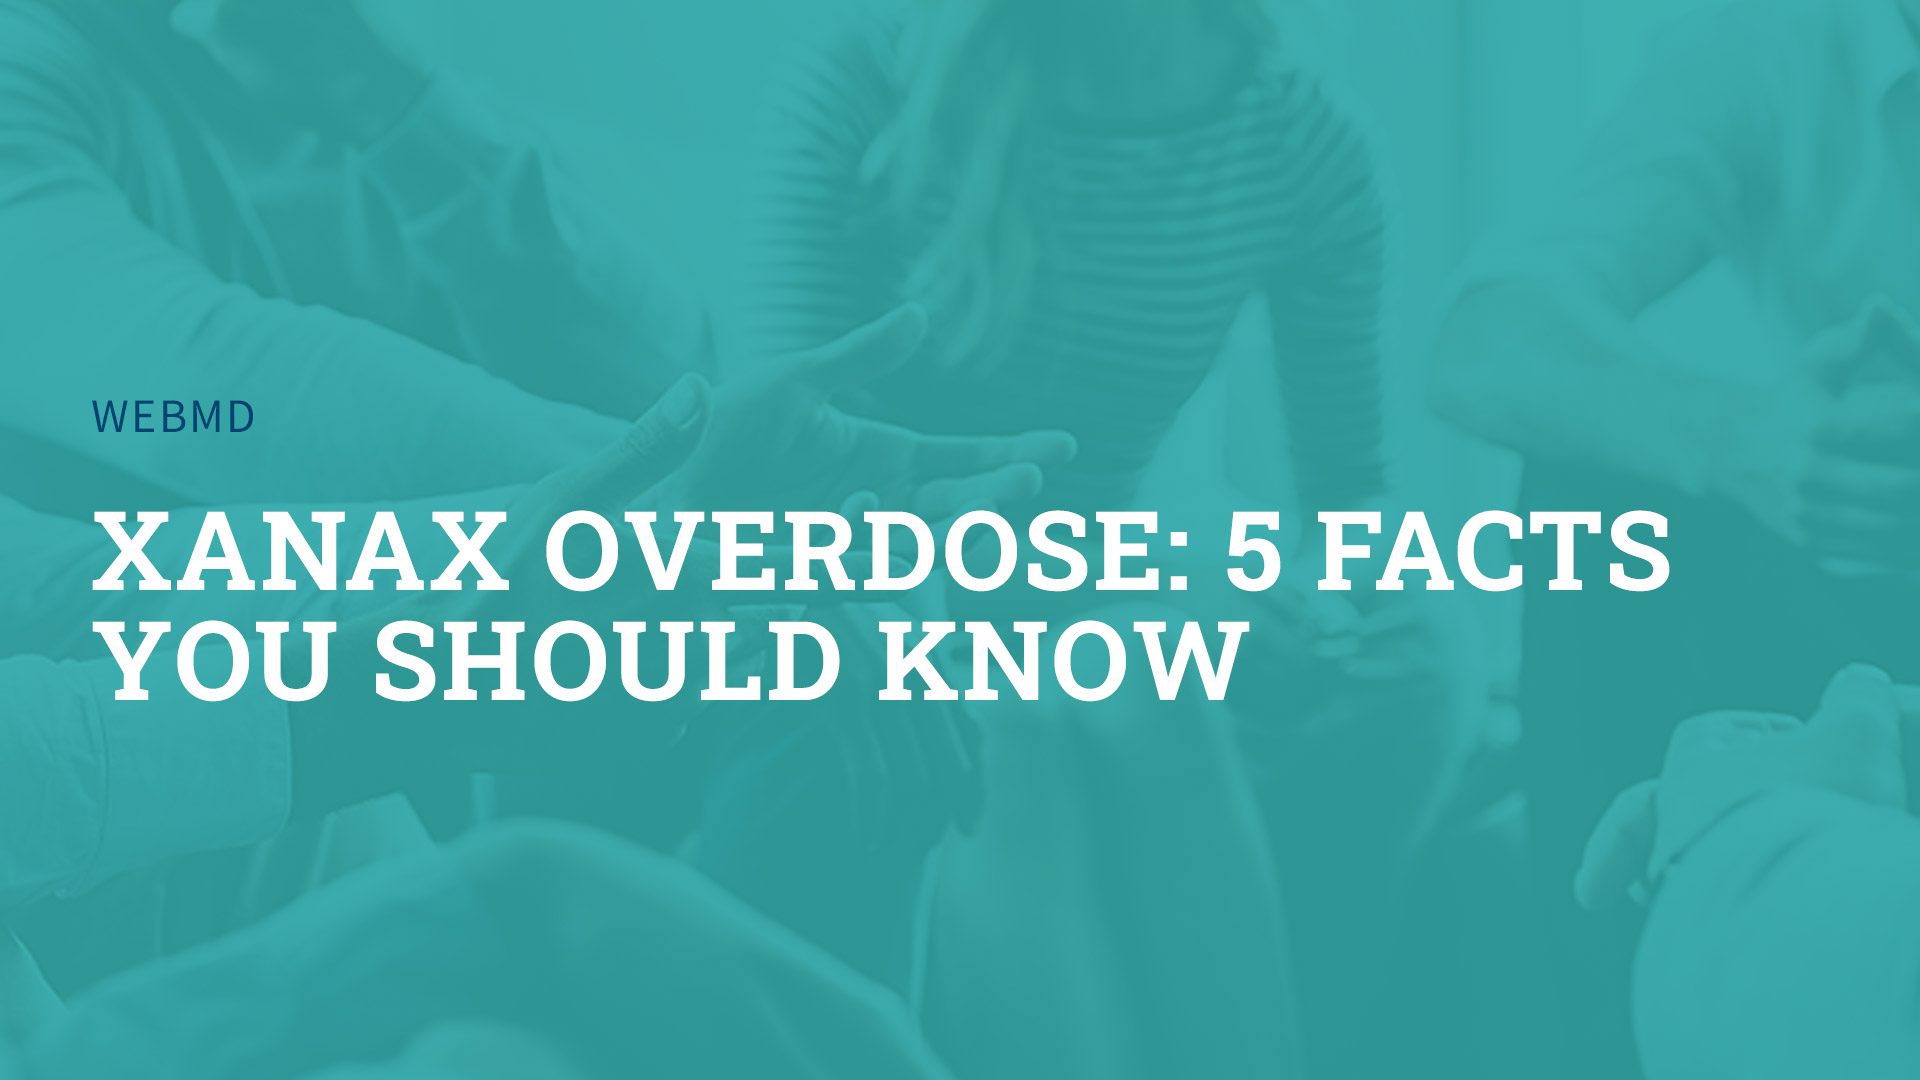 Xanax Overdose: 5 Facts You Should Know